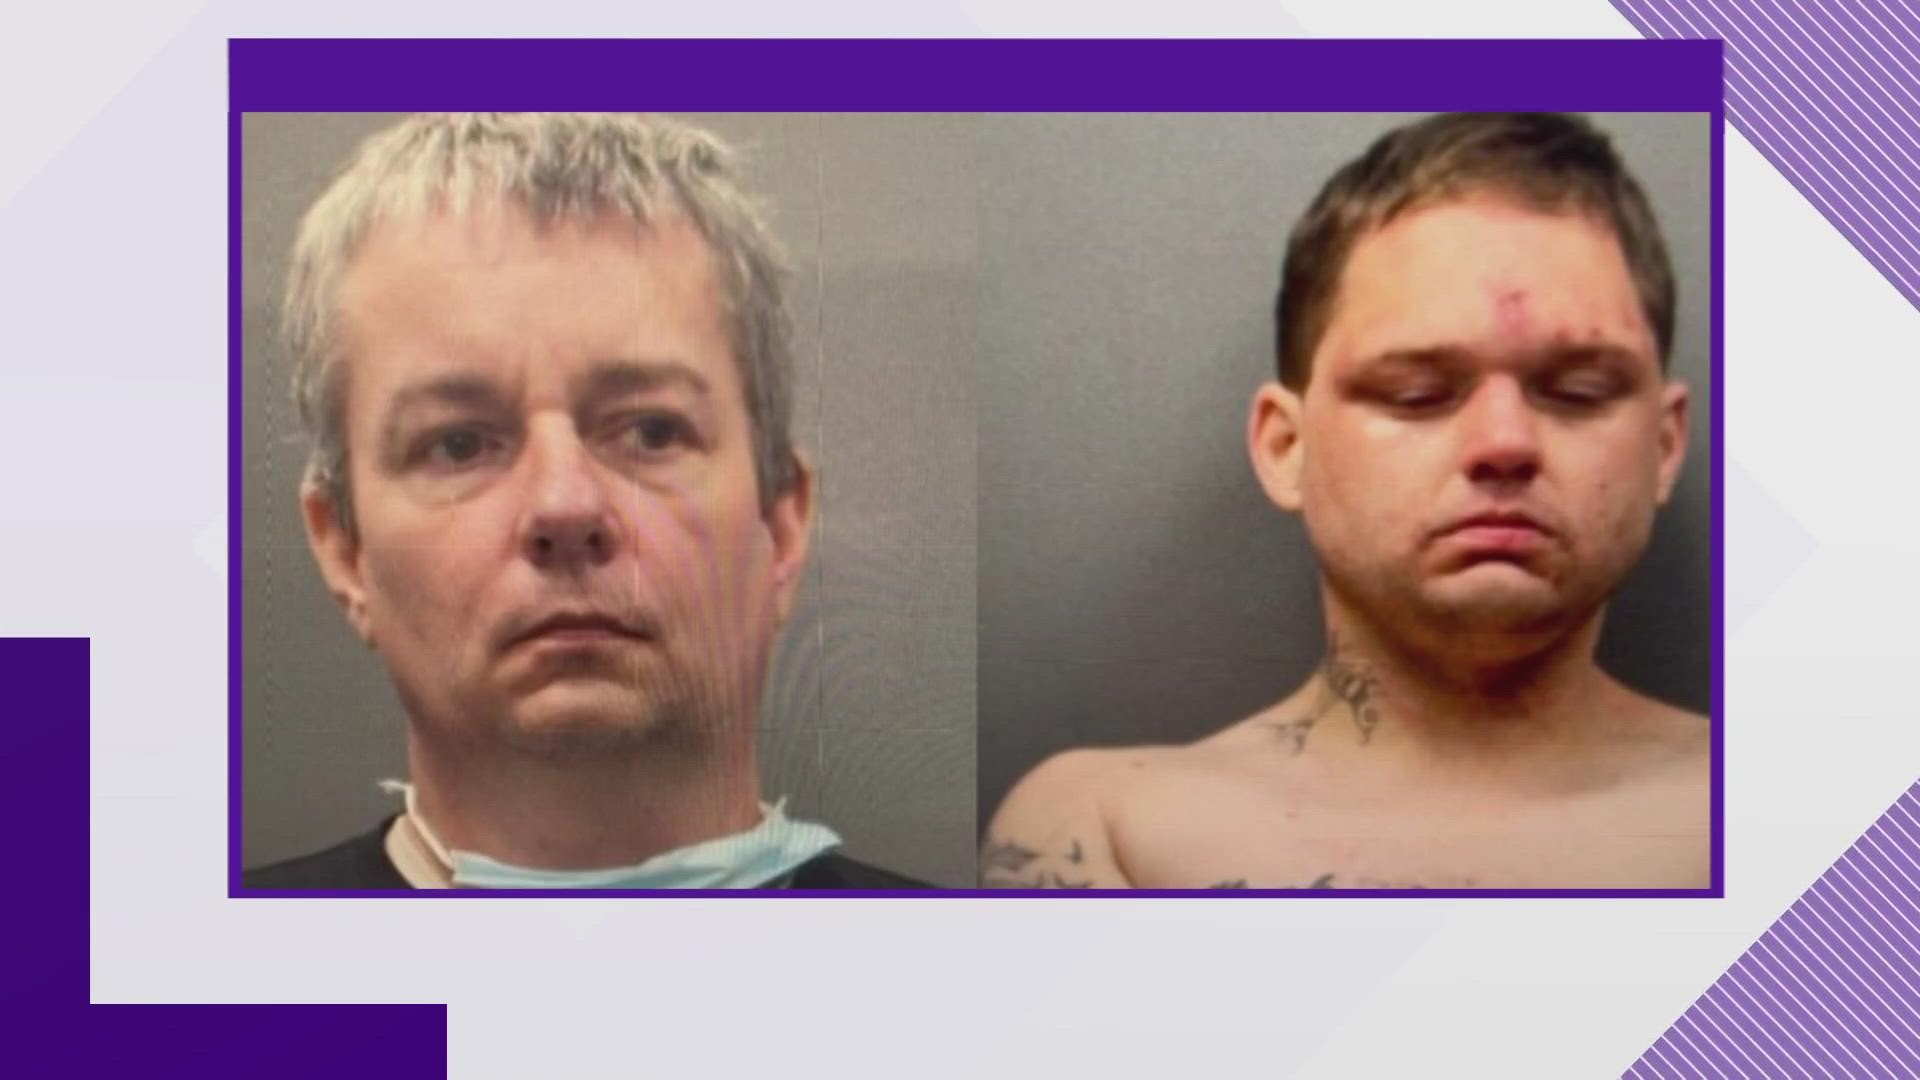 Police found a stolen vehicle linked to two escaped inmates but are still searching for those men. They escaped Thursday from jail in Abingdon, VA.